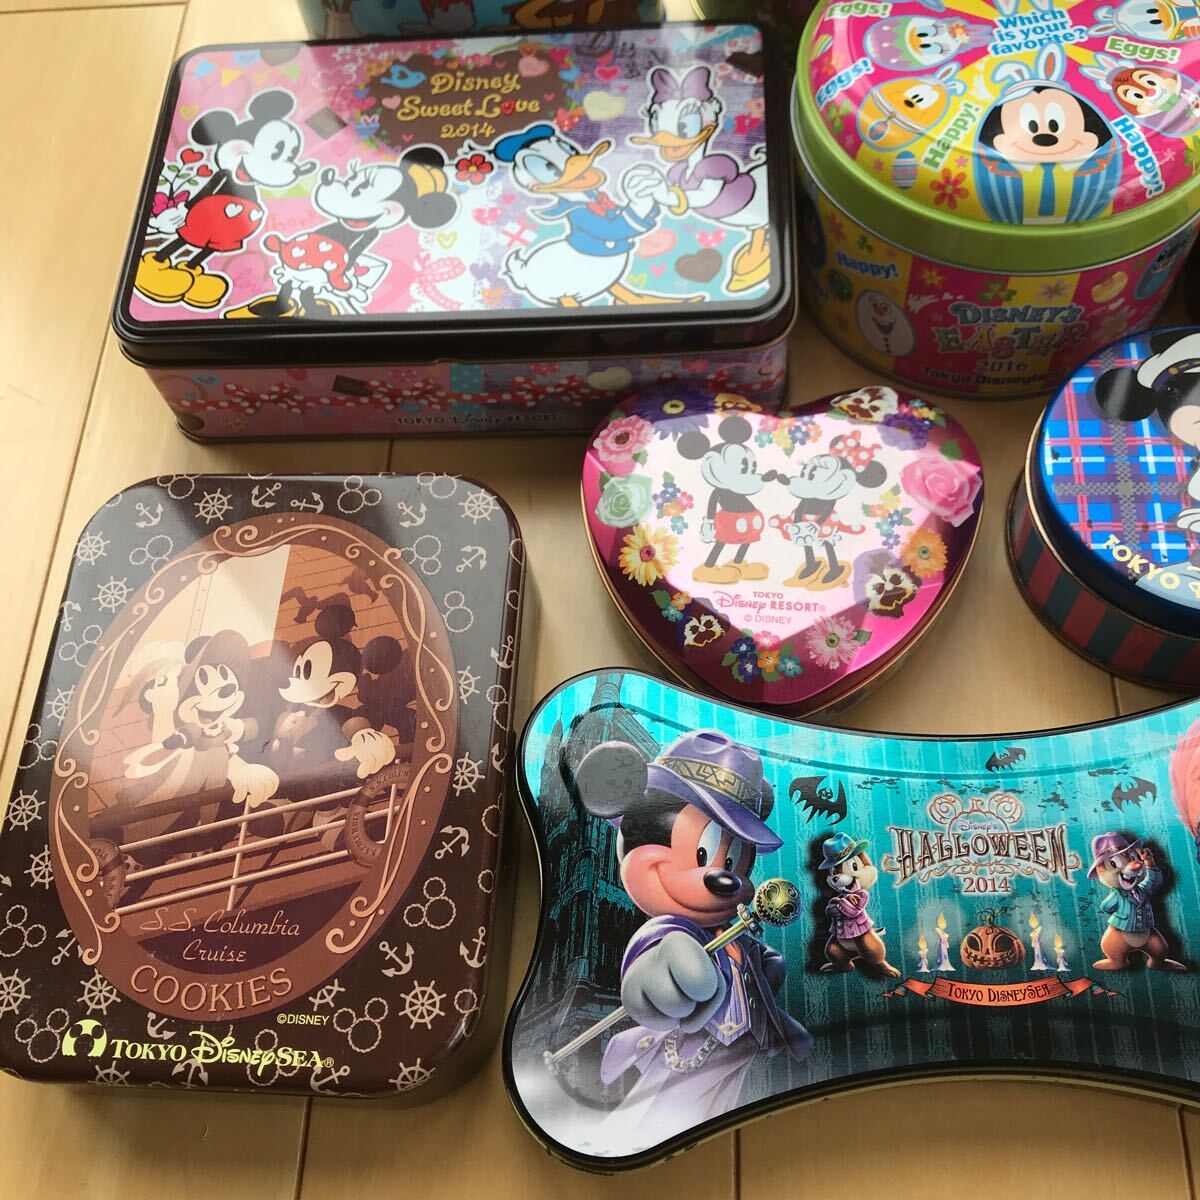 Disney Disney empty can 10 piece empty box 1 piece Tokyo Disney Land Mickey minnie collection empty can confection can 